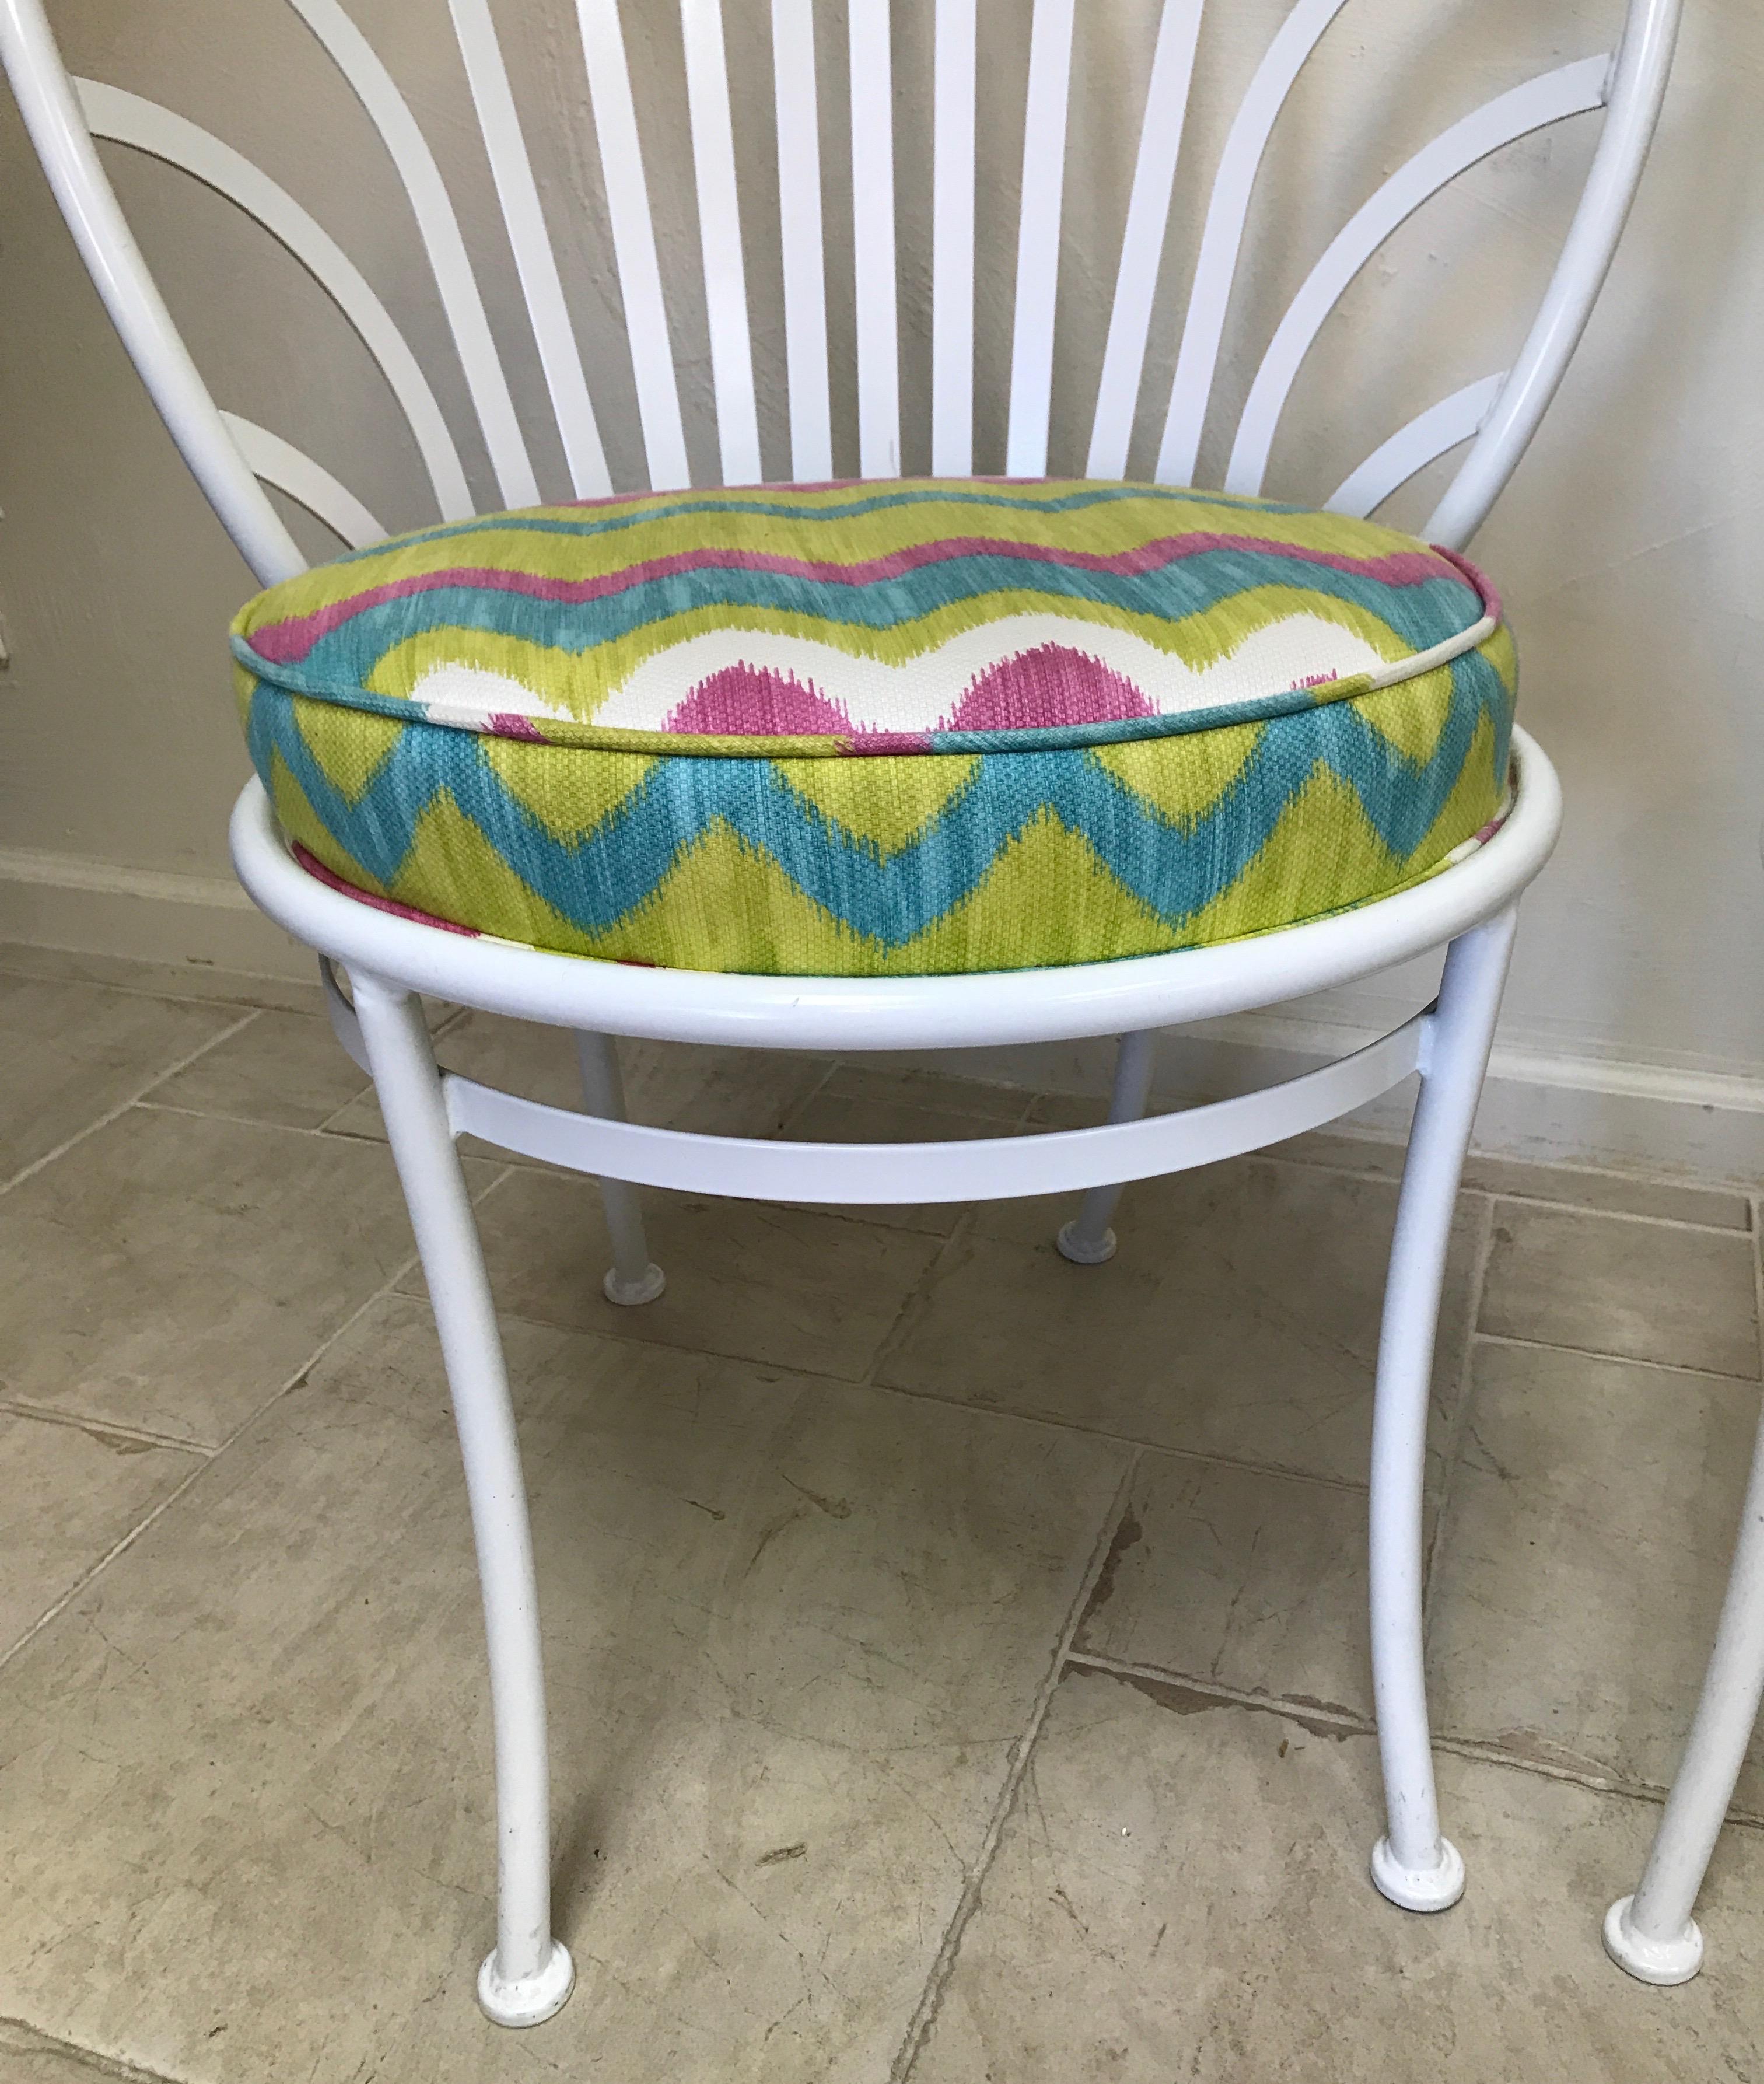 painted peacock chair